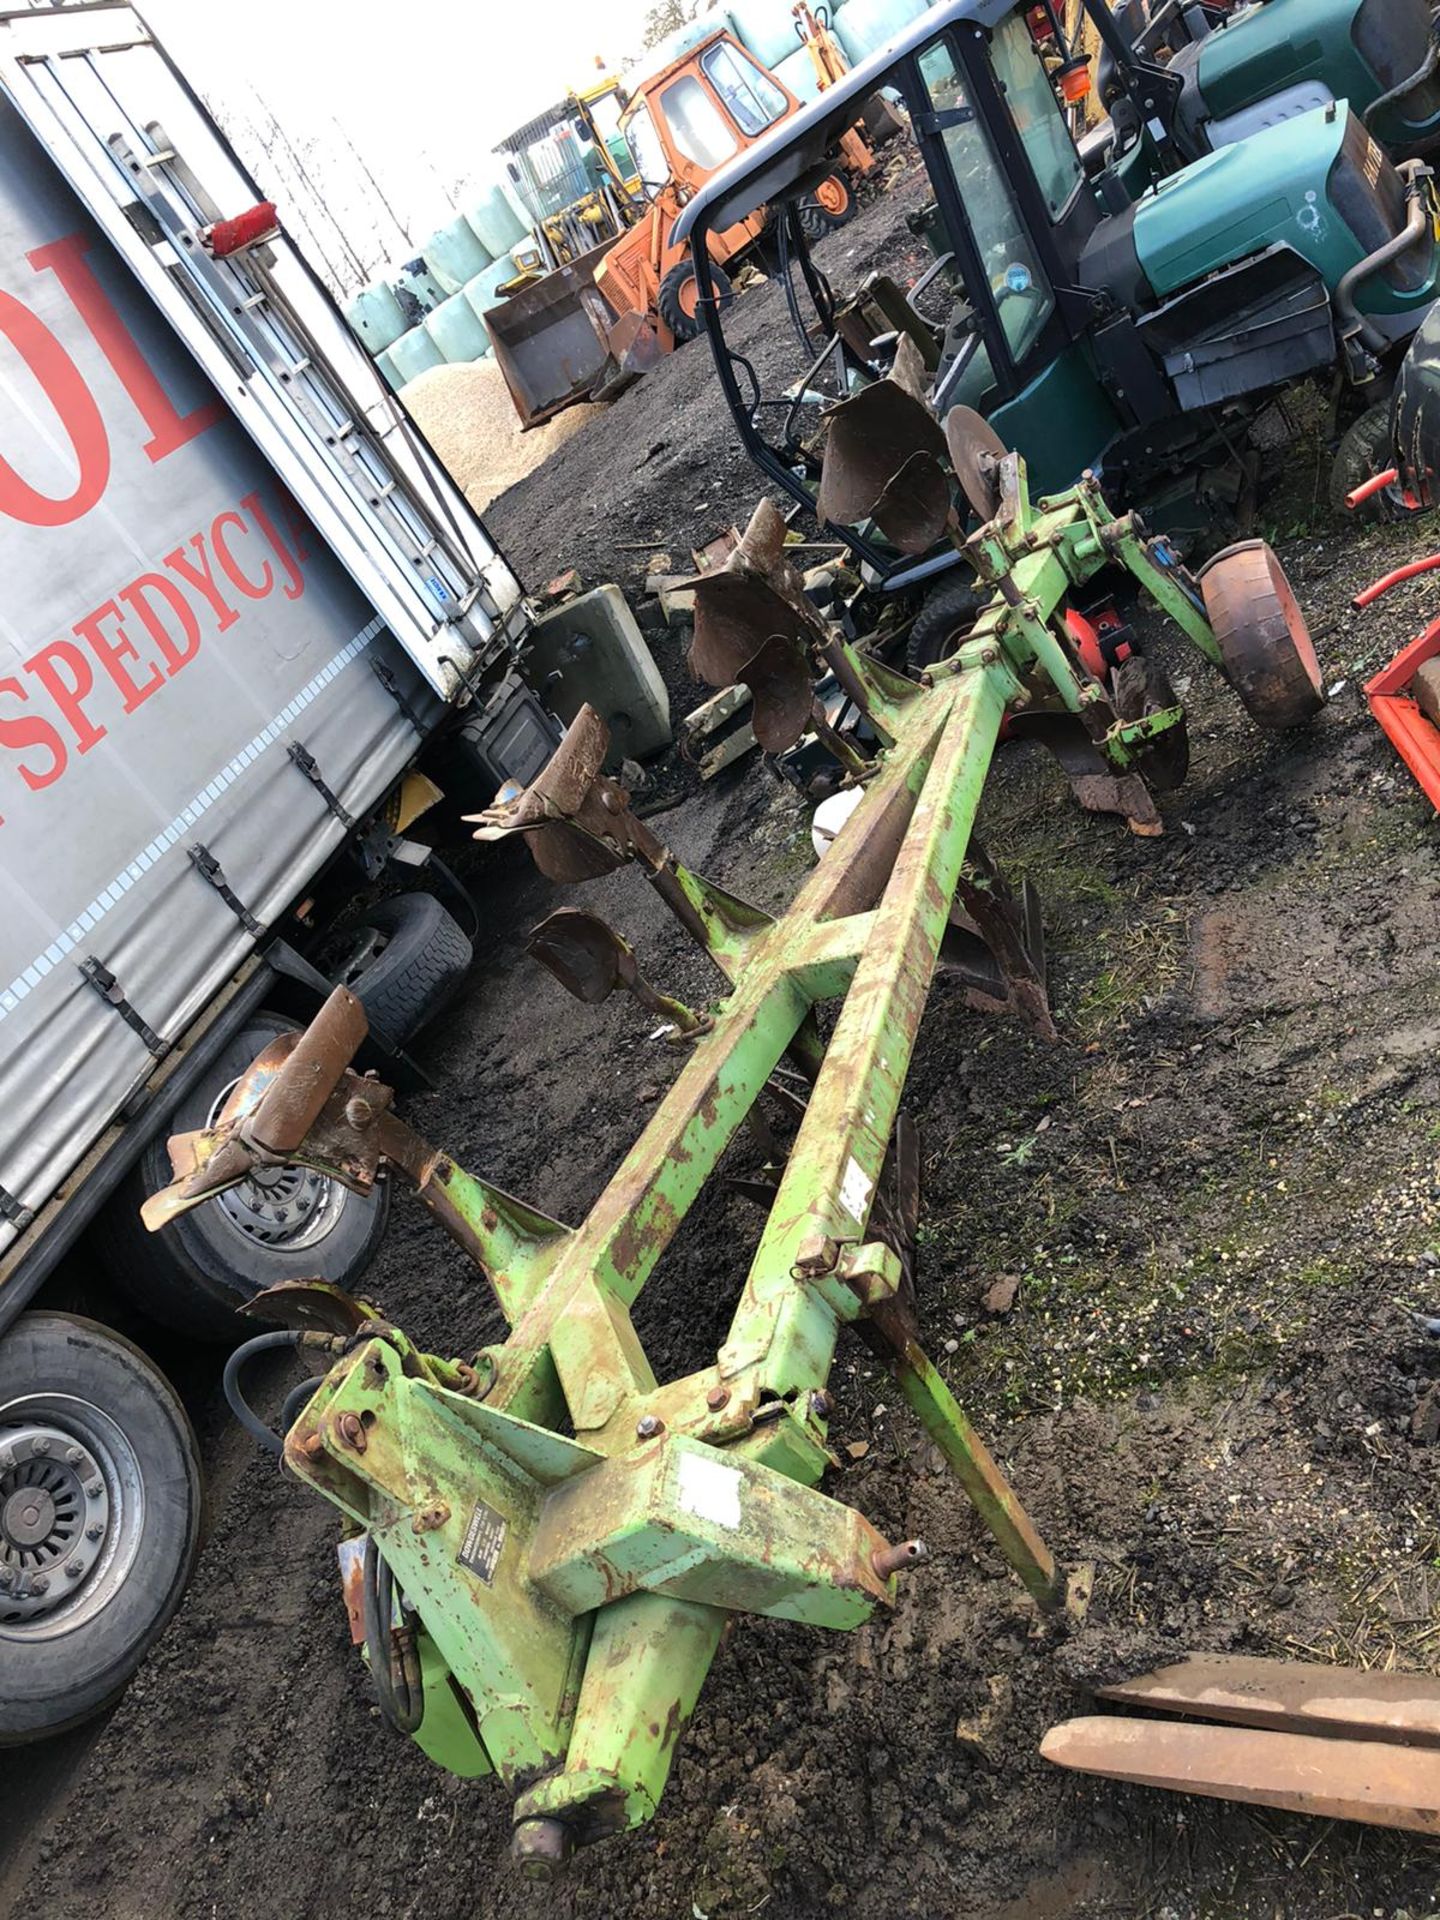 DOWDESWELL DP8B 4 FURROW PLOUGH IN GOOD CONDITION, NO WELD *PLUS VAT* - Image 7 of 8